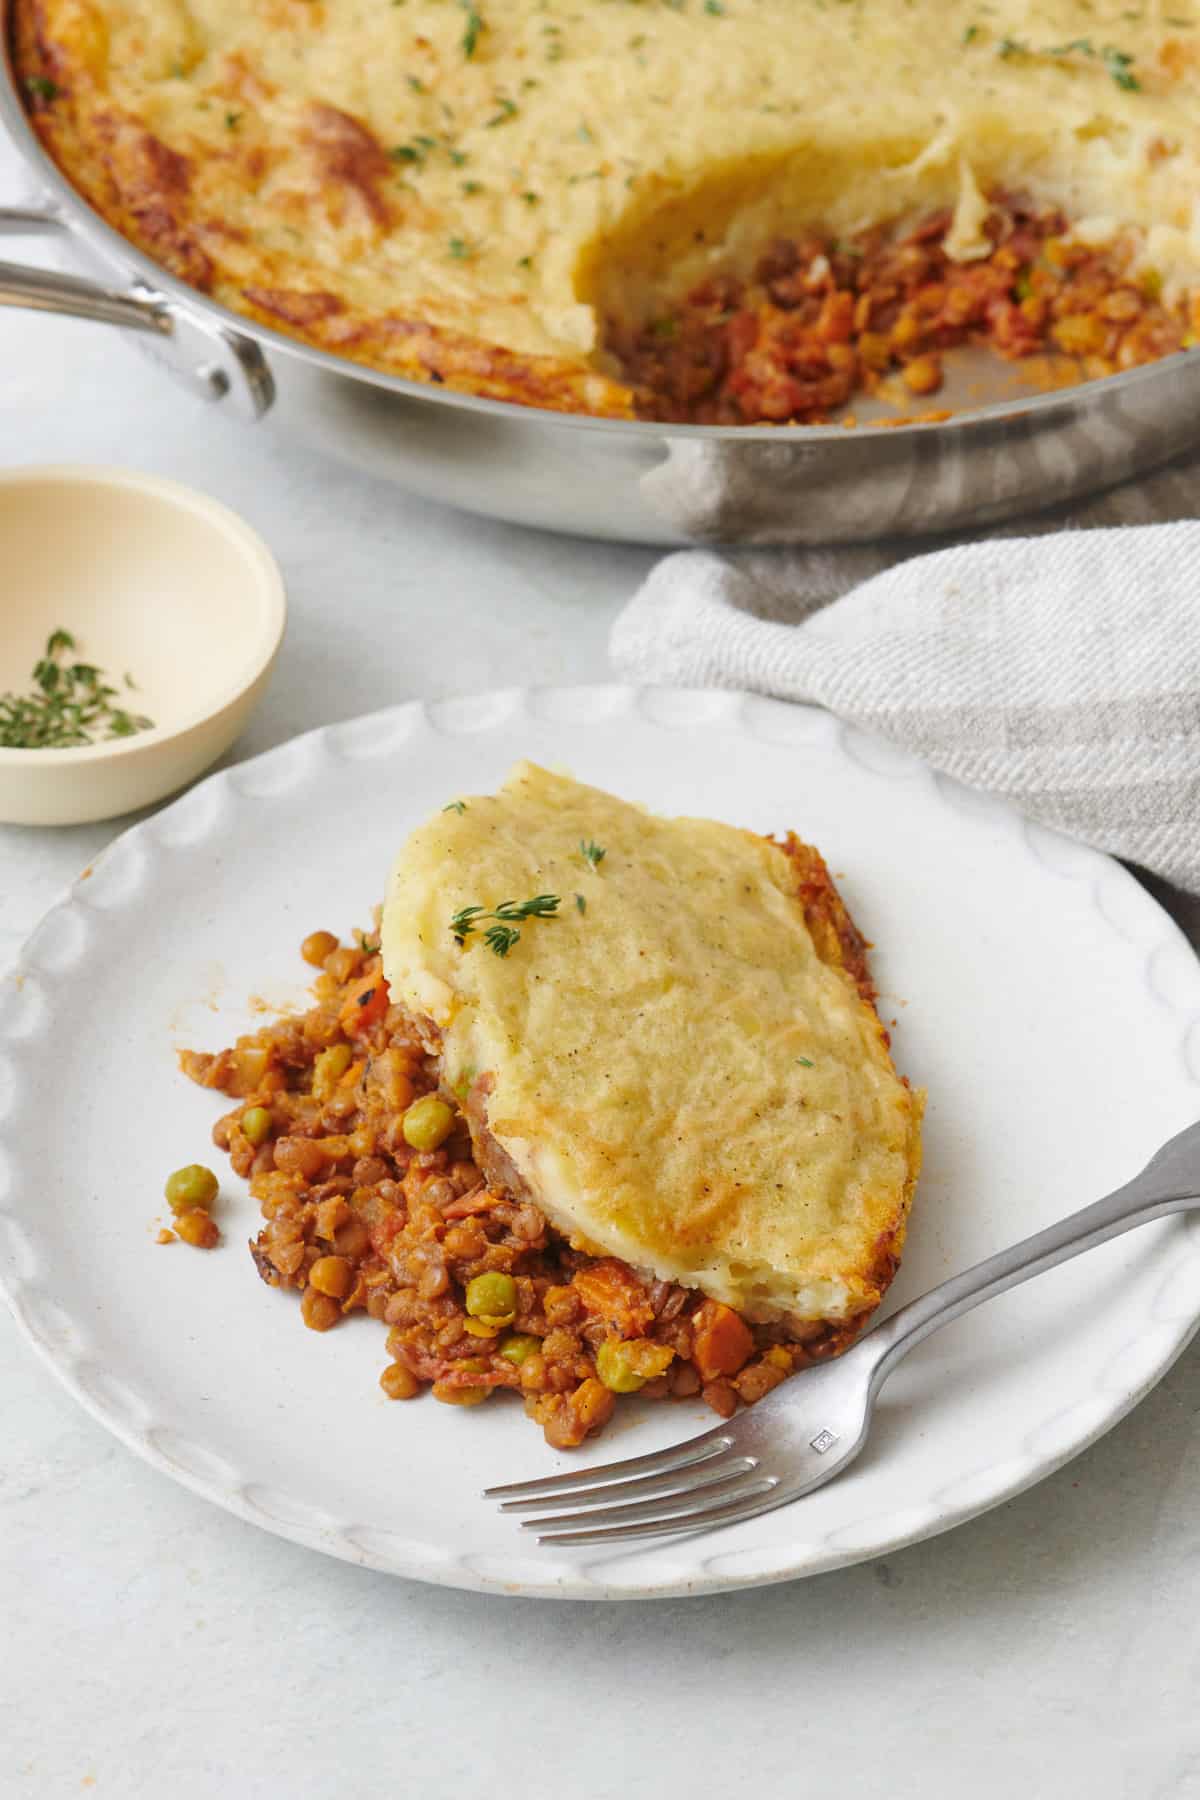 Serving of lentil shepherd's pie on a small plate with a fork and the skillet of recipe nearby.